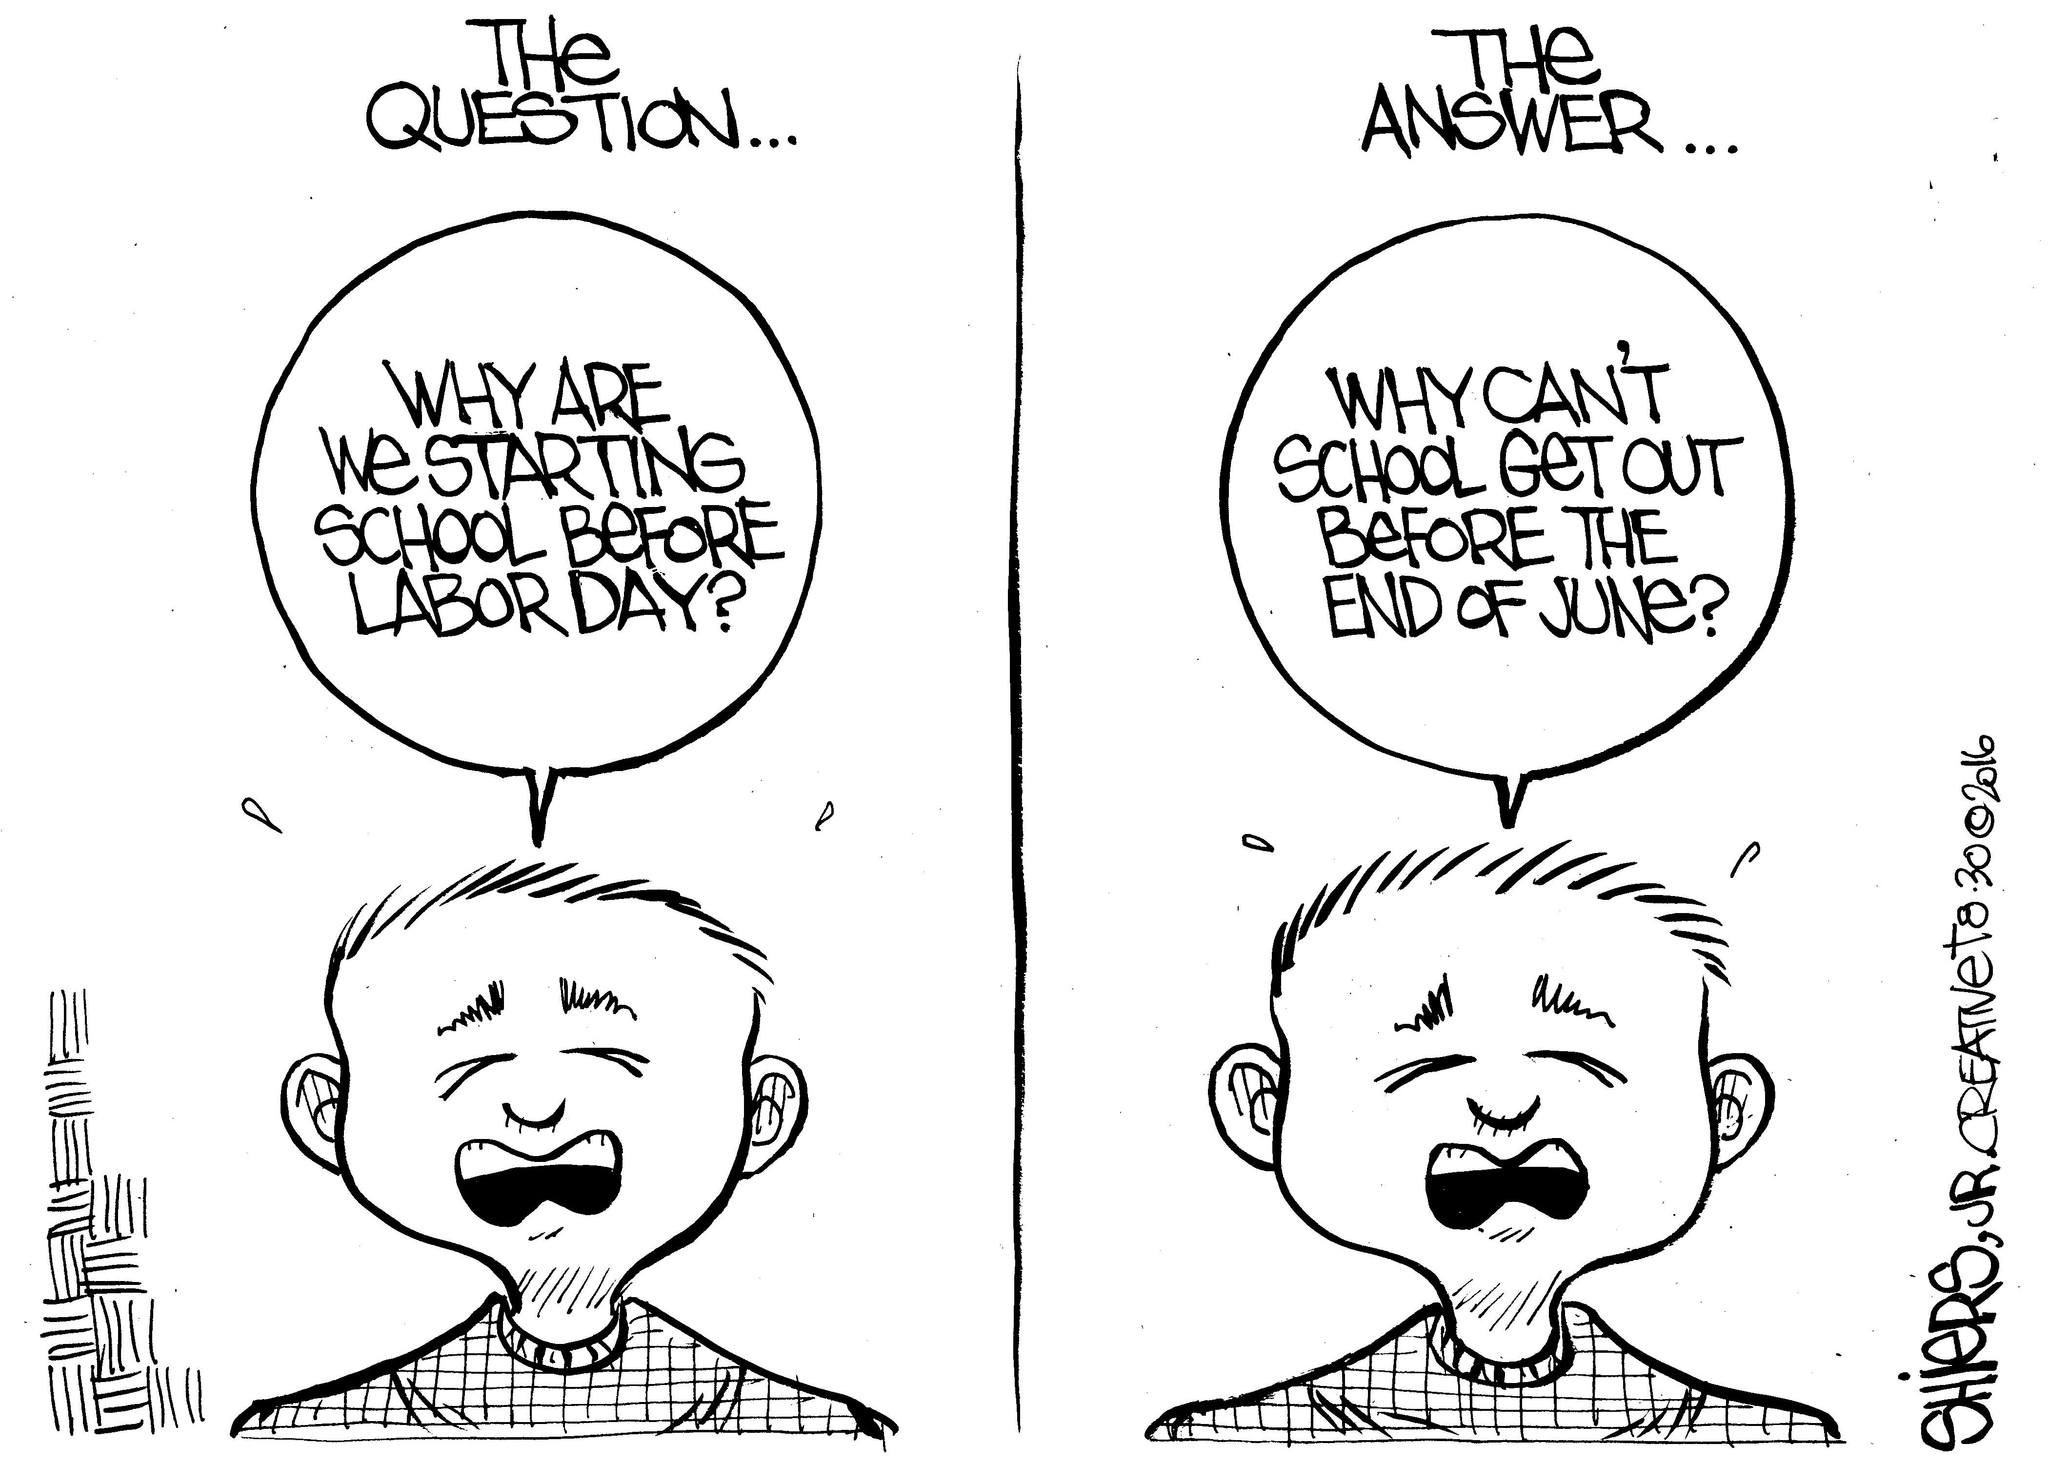 Why are we starting school before Labor Day? | Cartoon